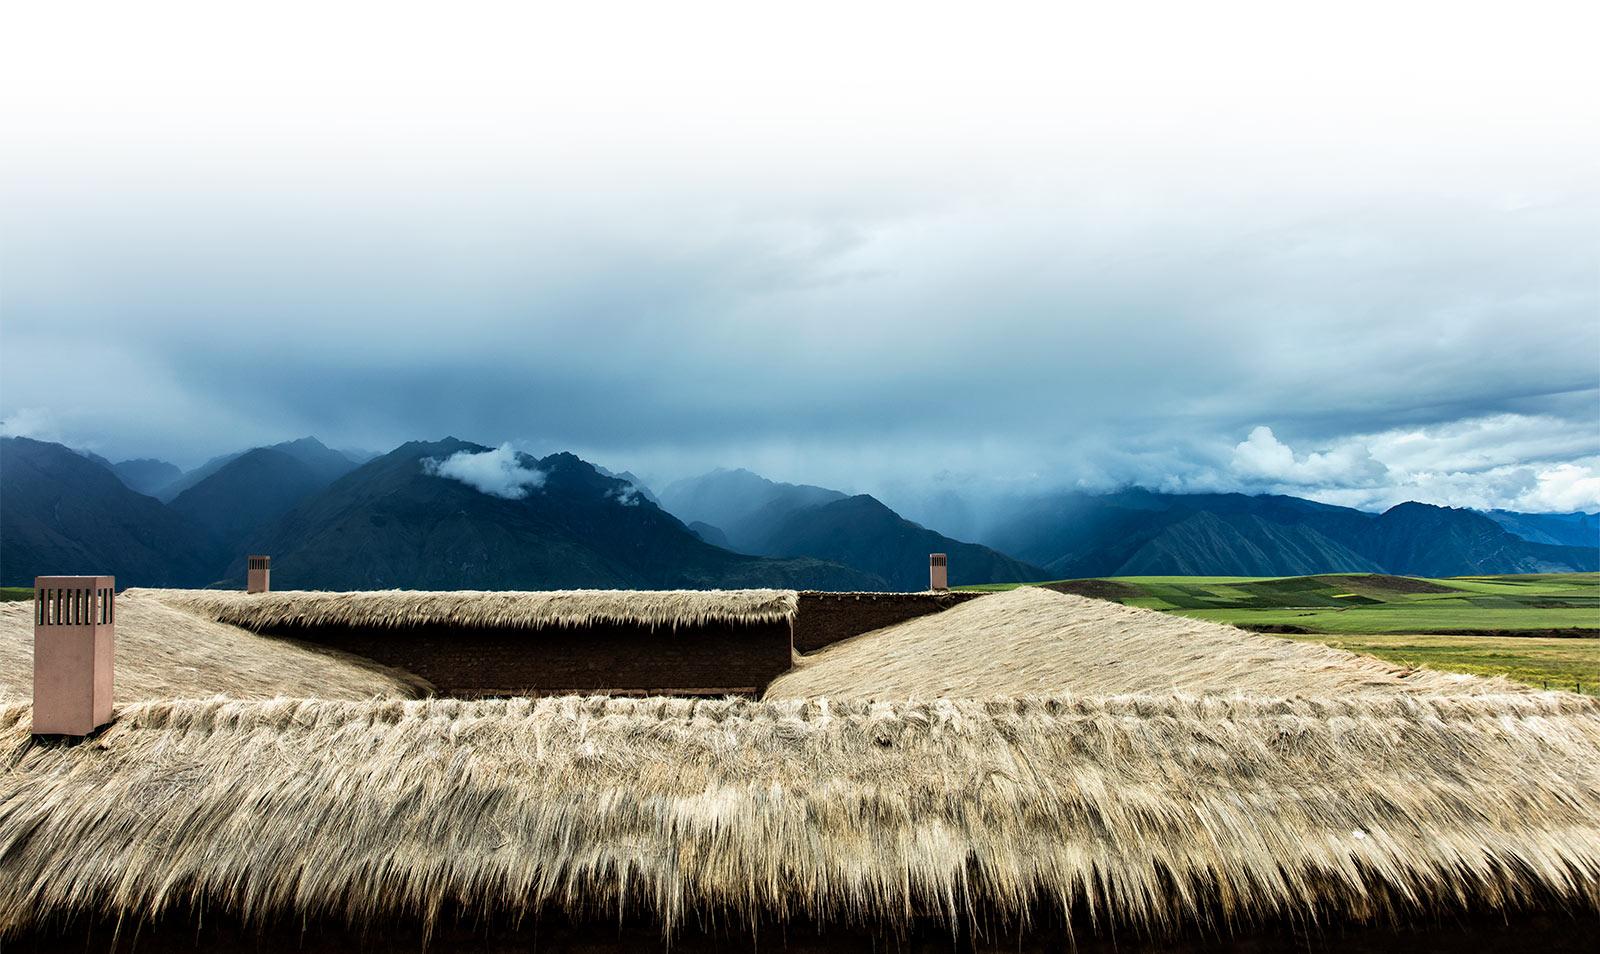 The roof of Mil Centro, surrounded by the Andean landscapes of Peru's Sacred Valley.